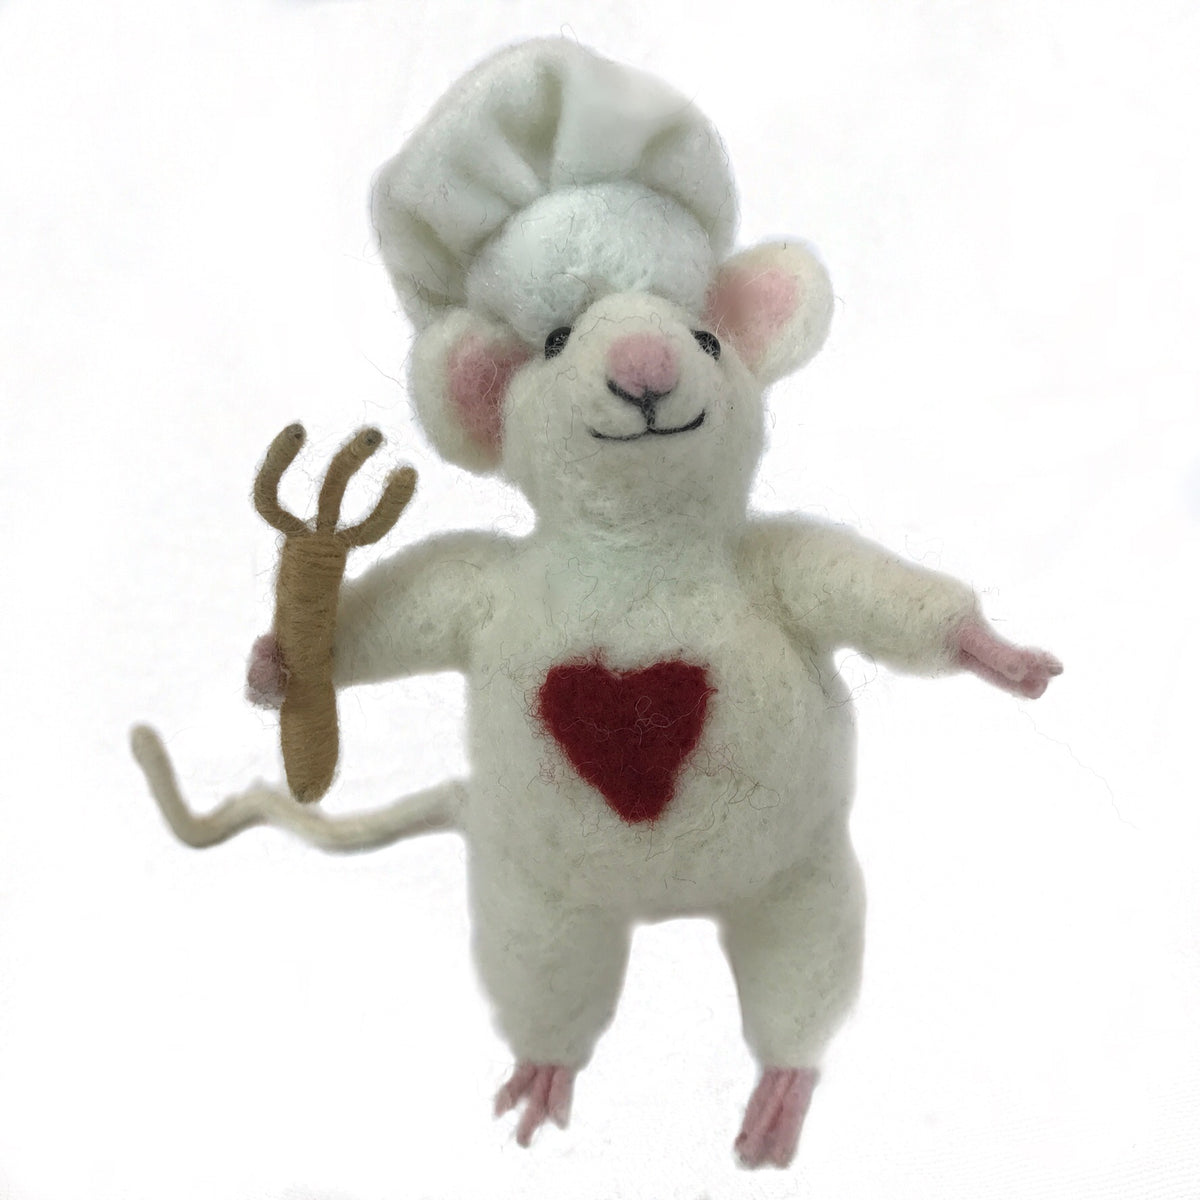 A product photo of a cute funny silly adorable fluffy soft natural white mouse with a red heart and white chef hat holding a fork felted alpaca wool figurine and ornament for gifts birthday holidays